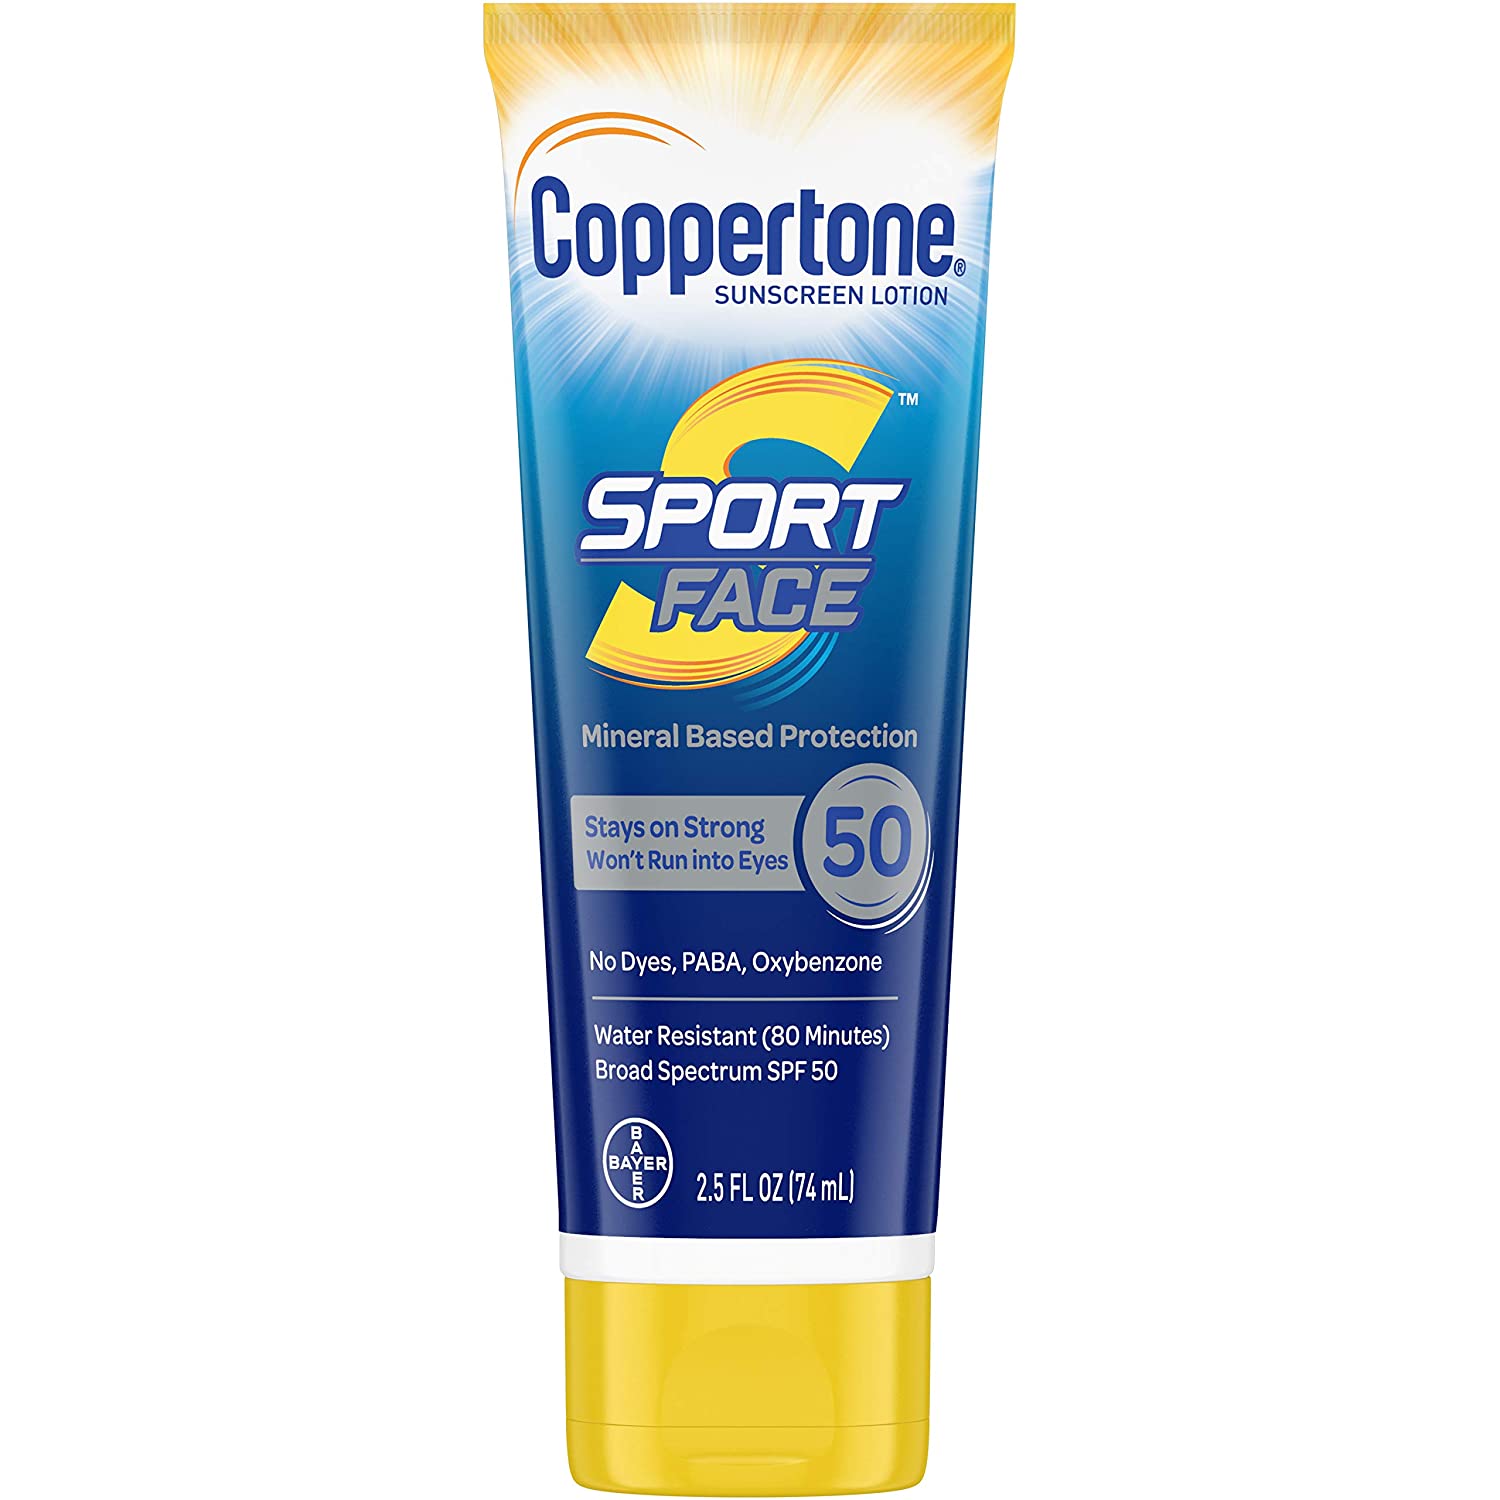 ''Coppertone Sport Face SPF 50 Sunscreen Mineral Based LOTION, Dye Free, PABA Free & Oxybenzone Free 